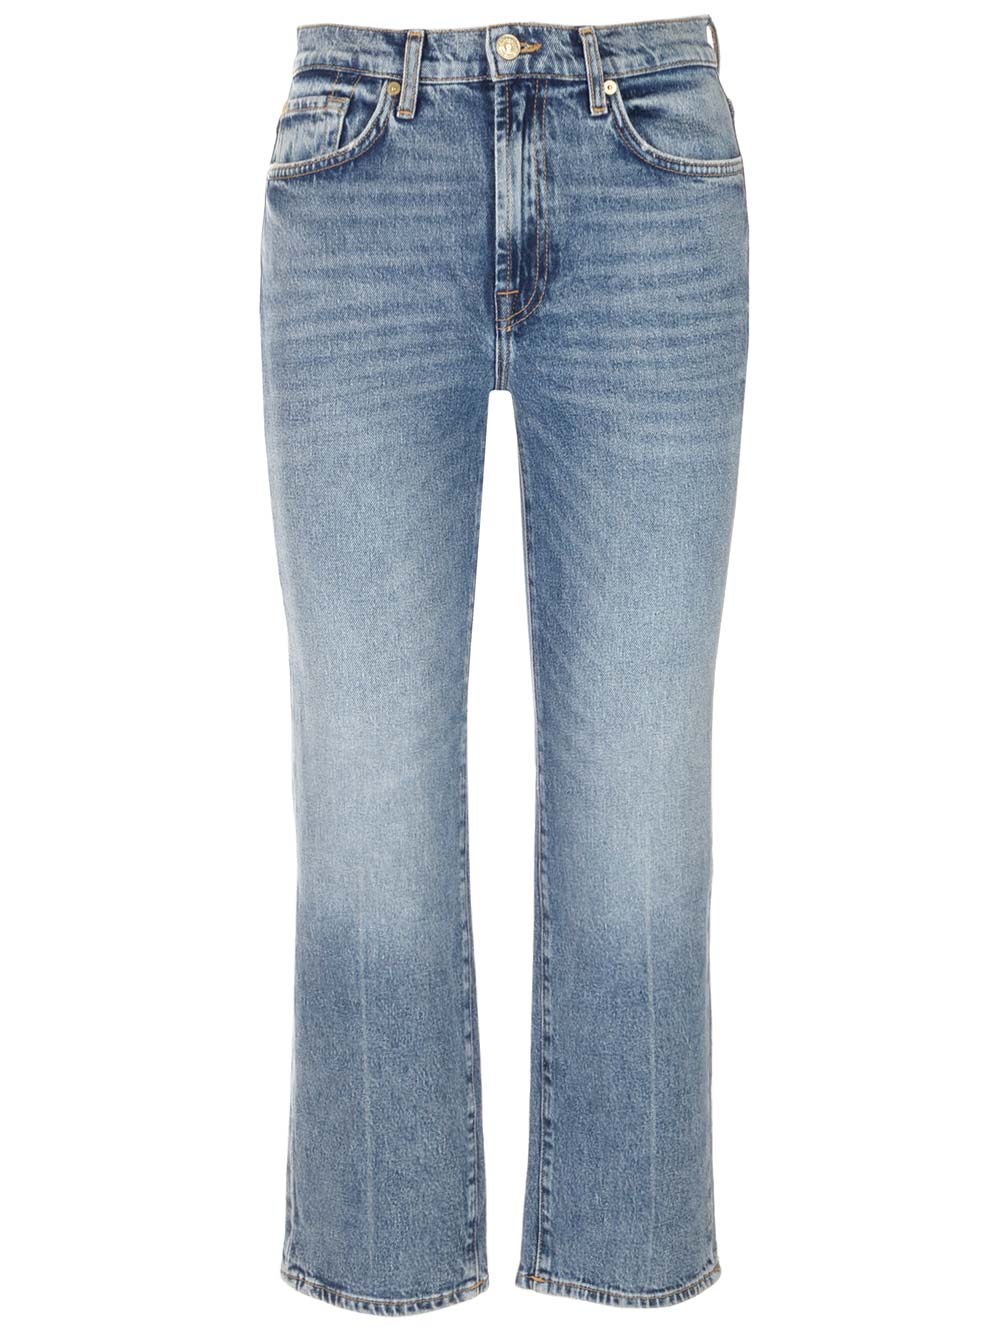 7 FOR ALL MANKIND LOGAN JEANS